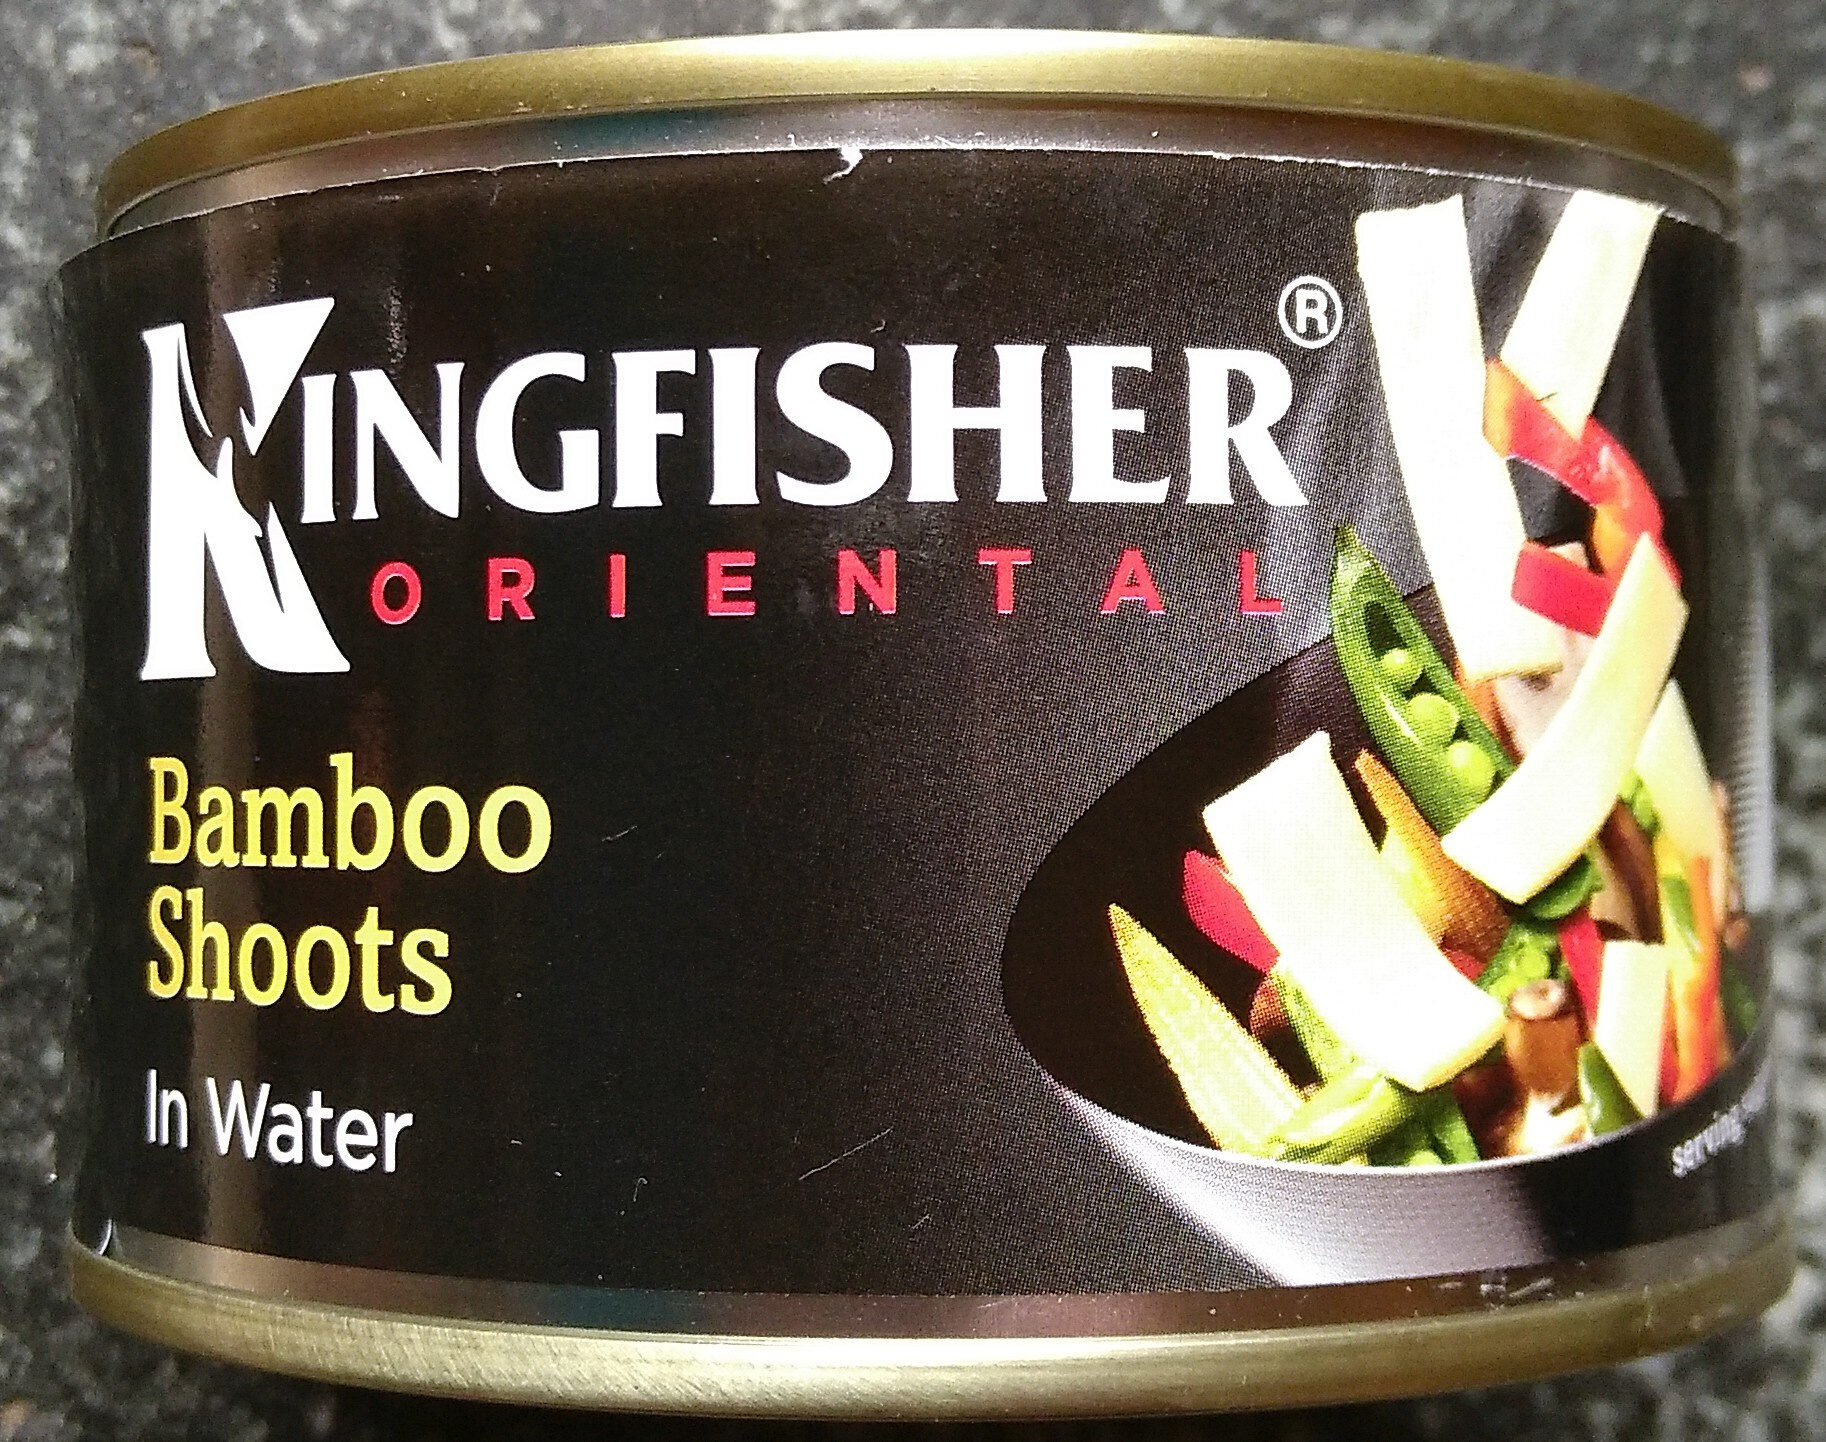 Kingfisher Bamboo Shoots in Water - Product